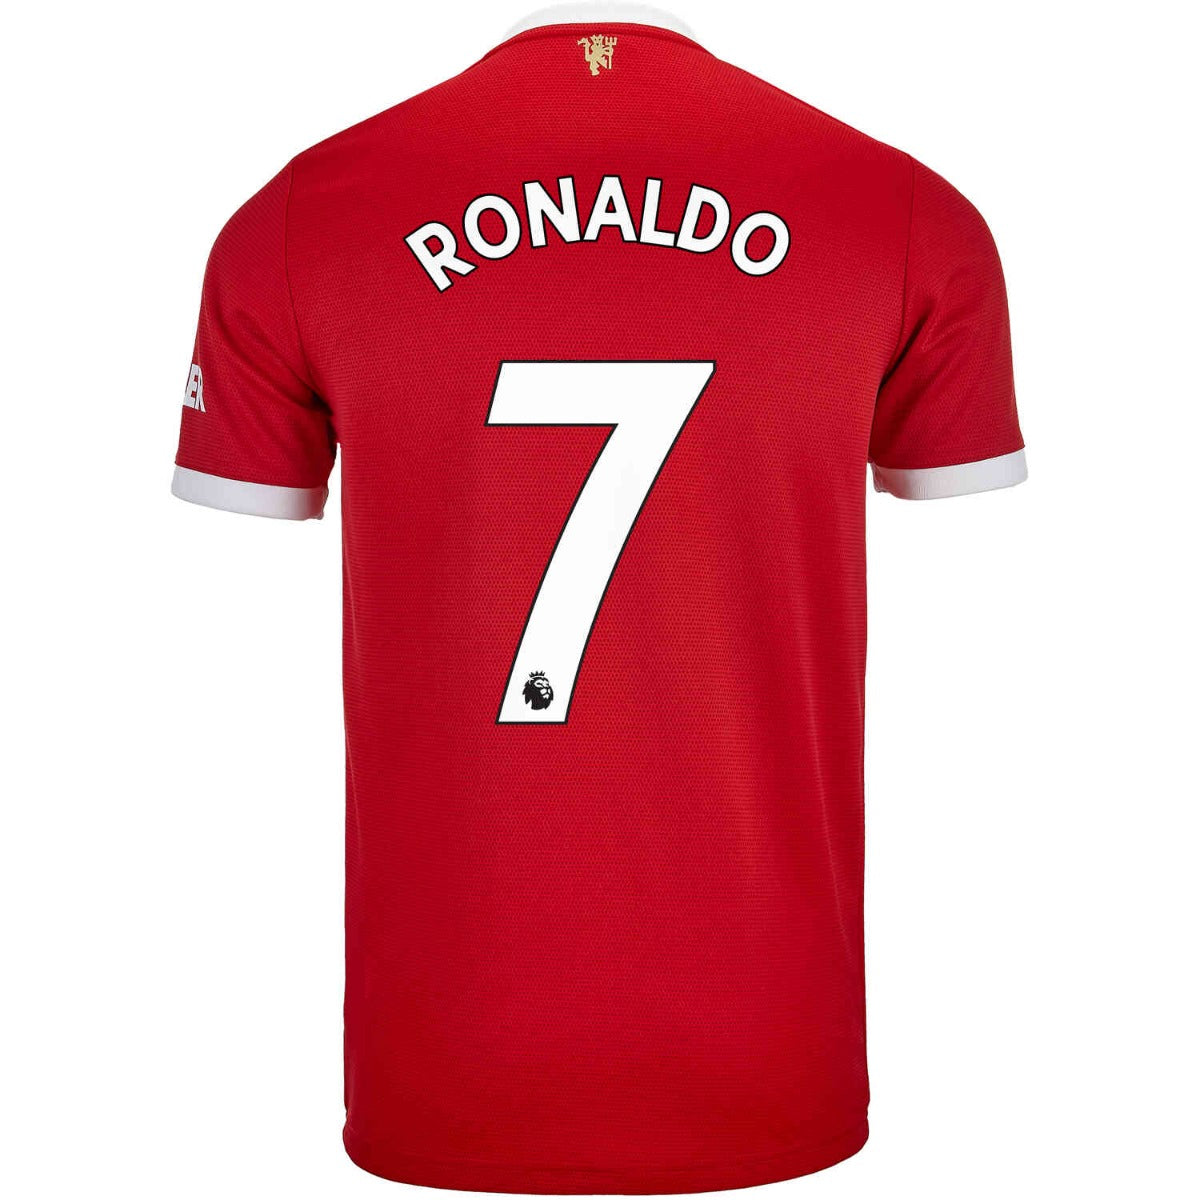 Adidas, Maglia adidas 2021-22 Manchester United Authentic Home - Rosso-Bianco